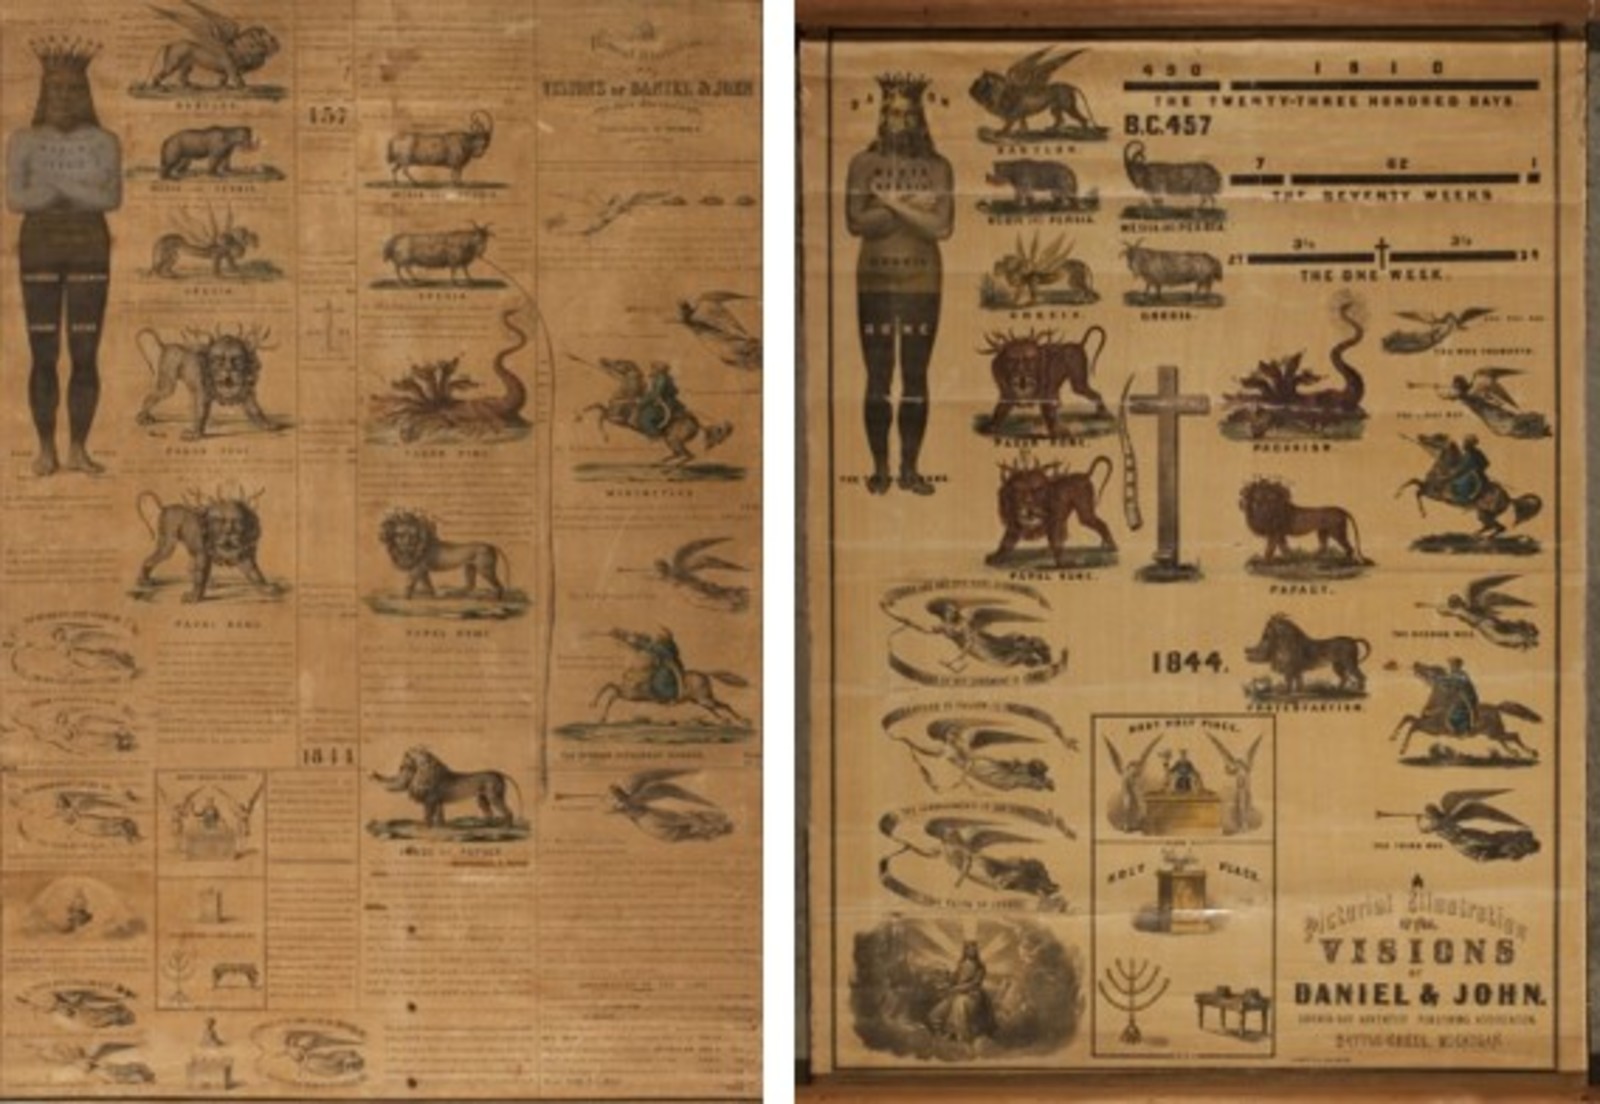 1863 prophecy chart